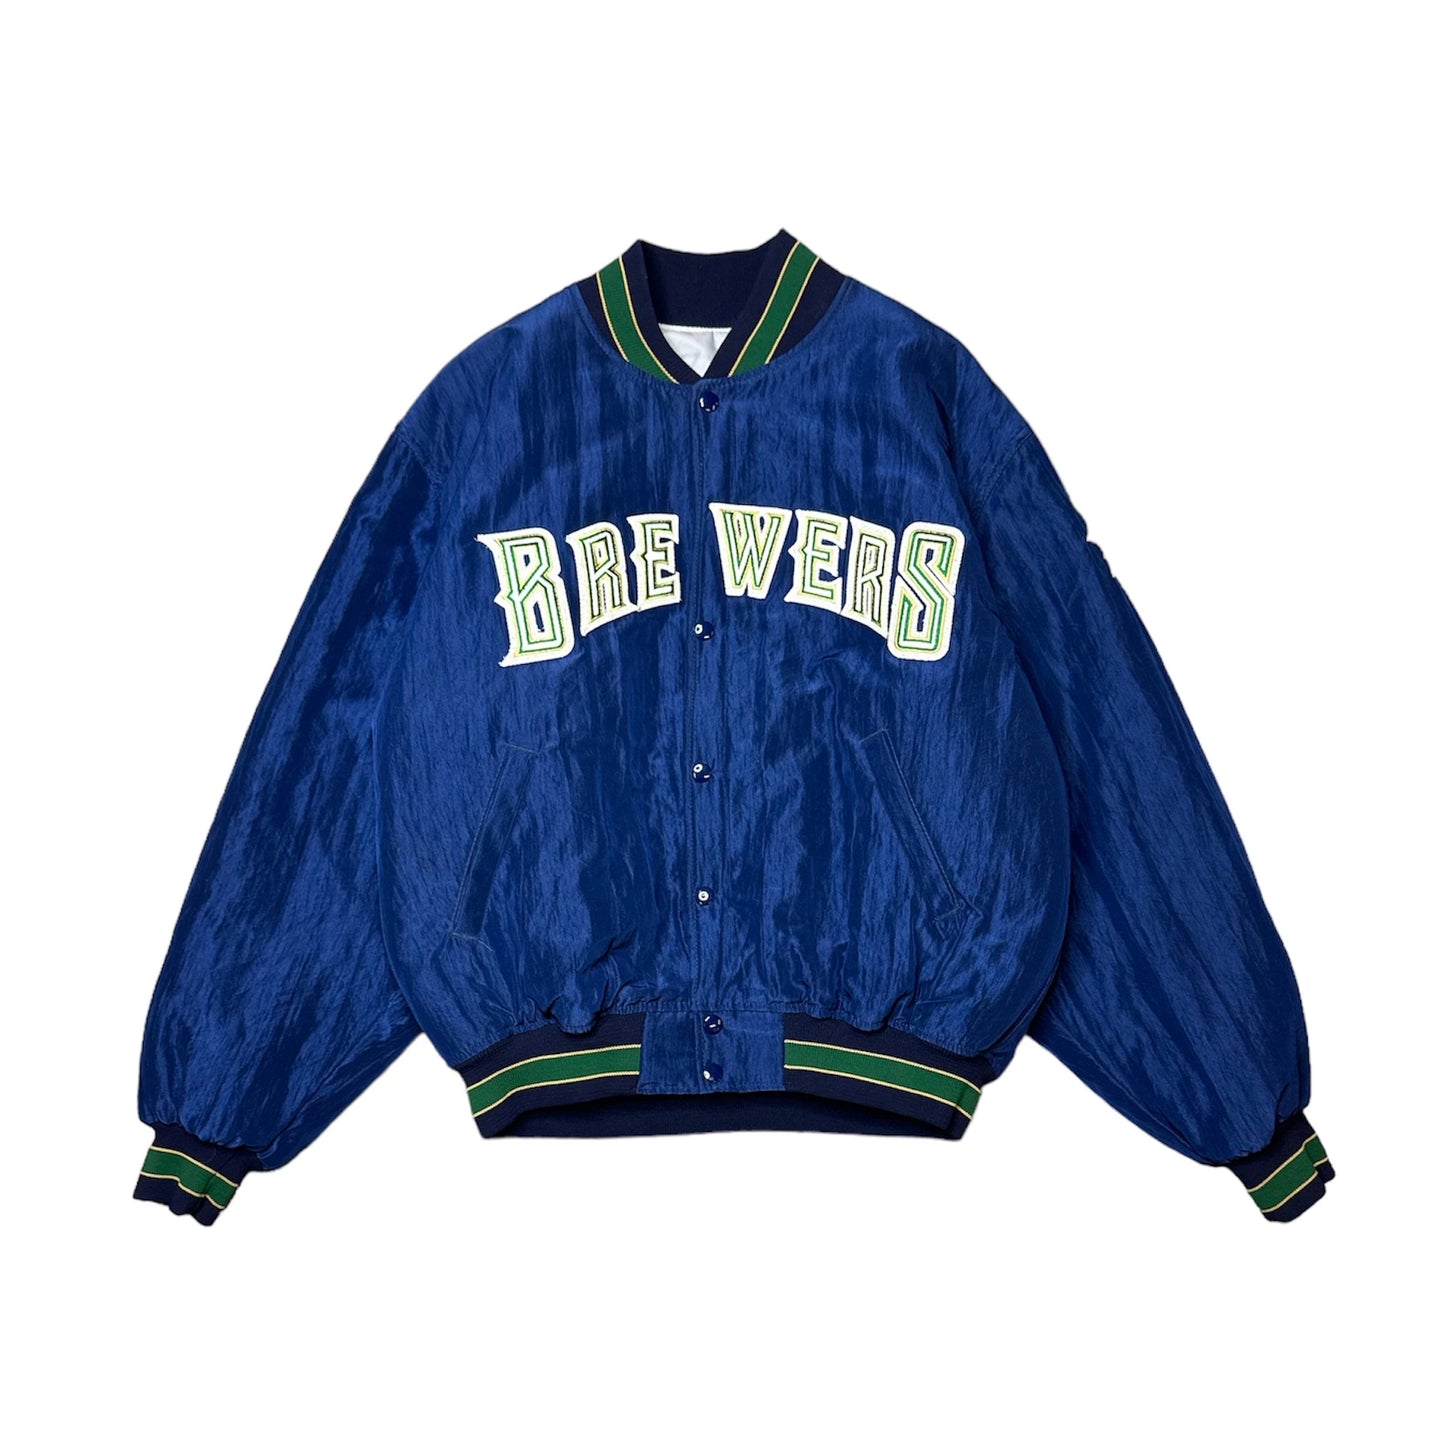 Brewers Bomber Jacket